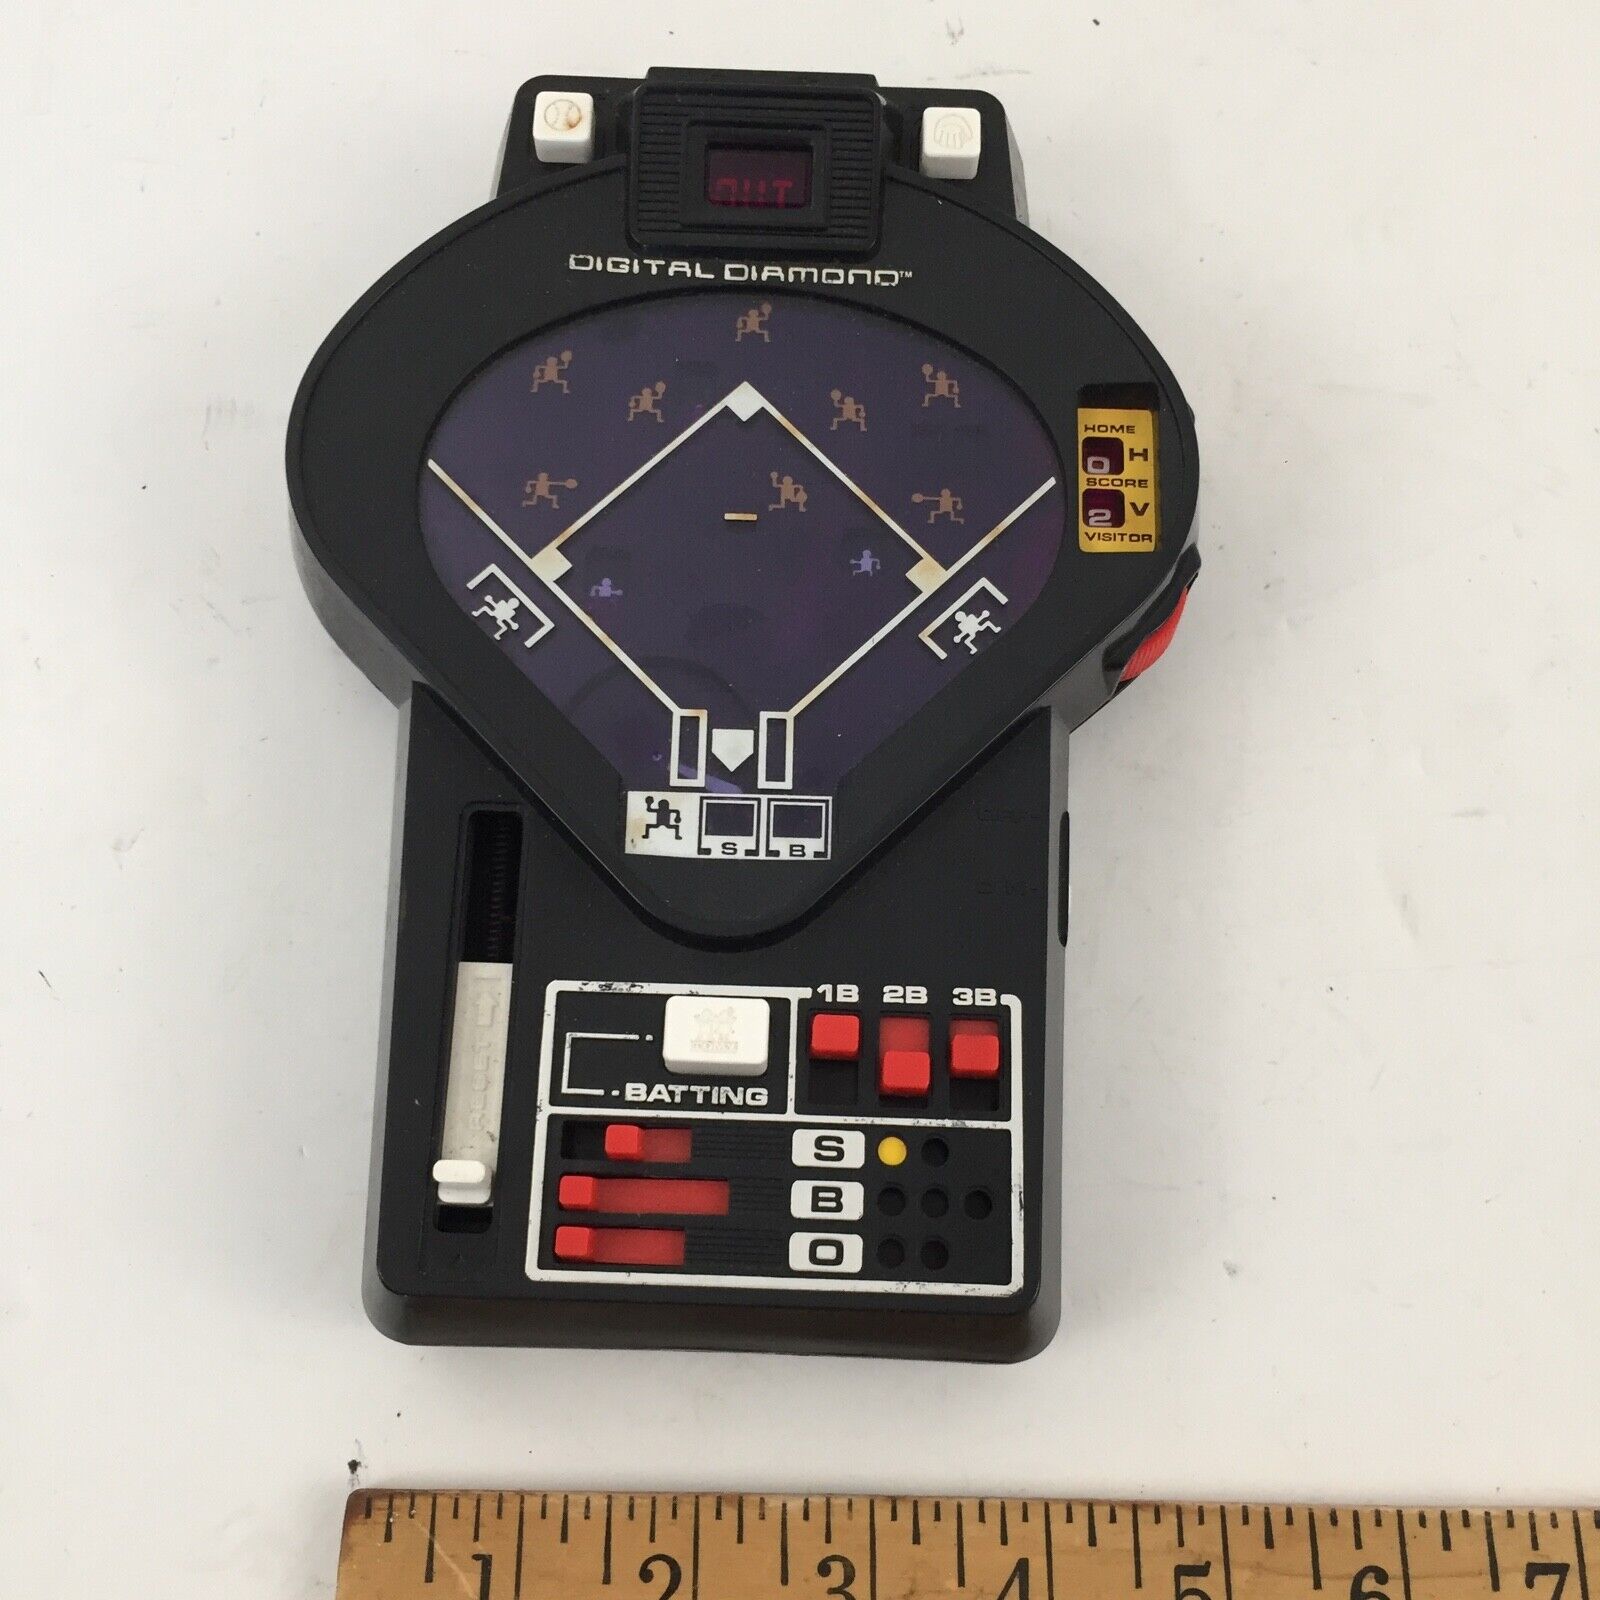 DIGITAL DIAMOND By TOMY 1978 2 Player Tabletop Baseball Game NOT WORKING